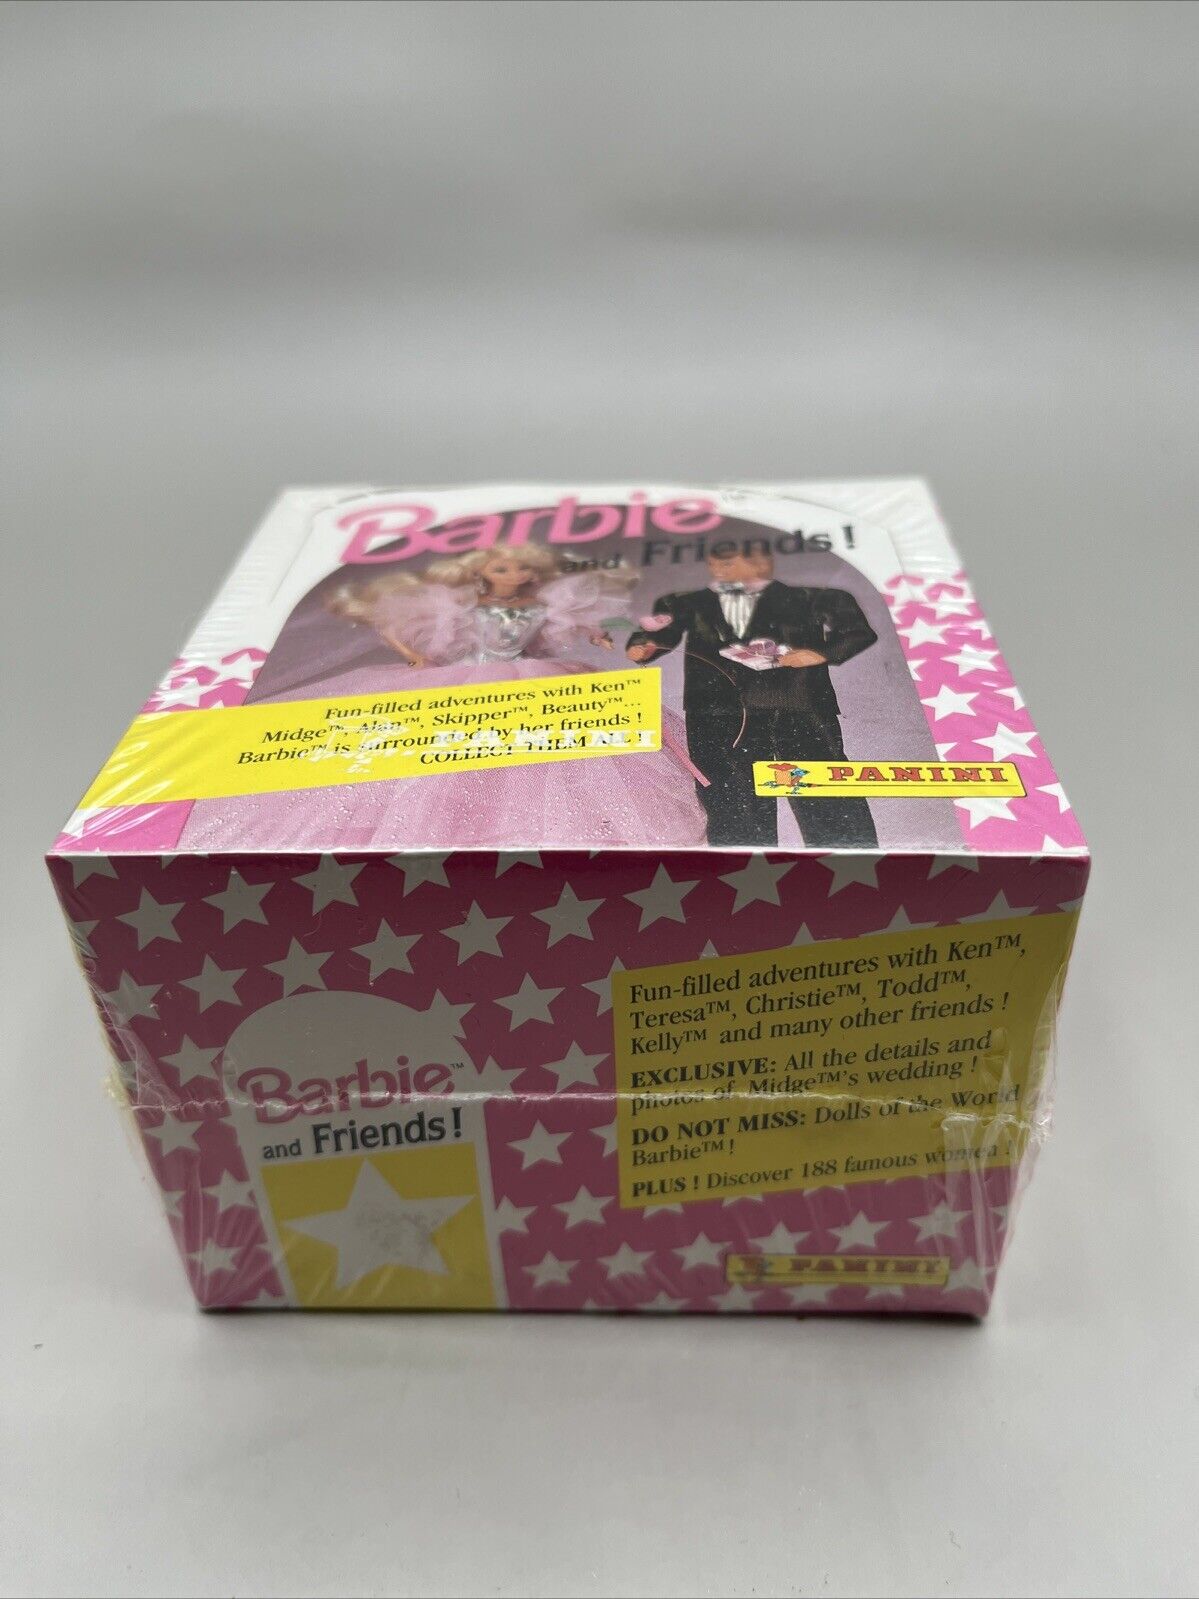 1992 PANINI BARBIE AND FRIENDS TRADING CARD FACTORY SEALED BOX